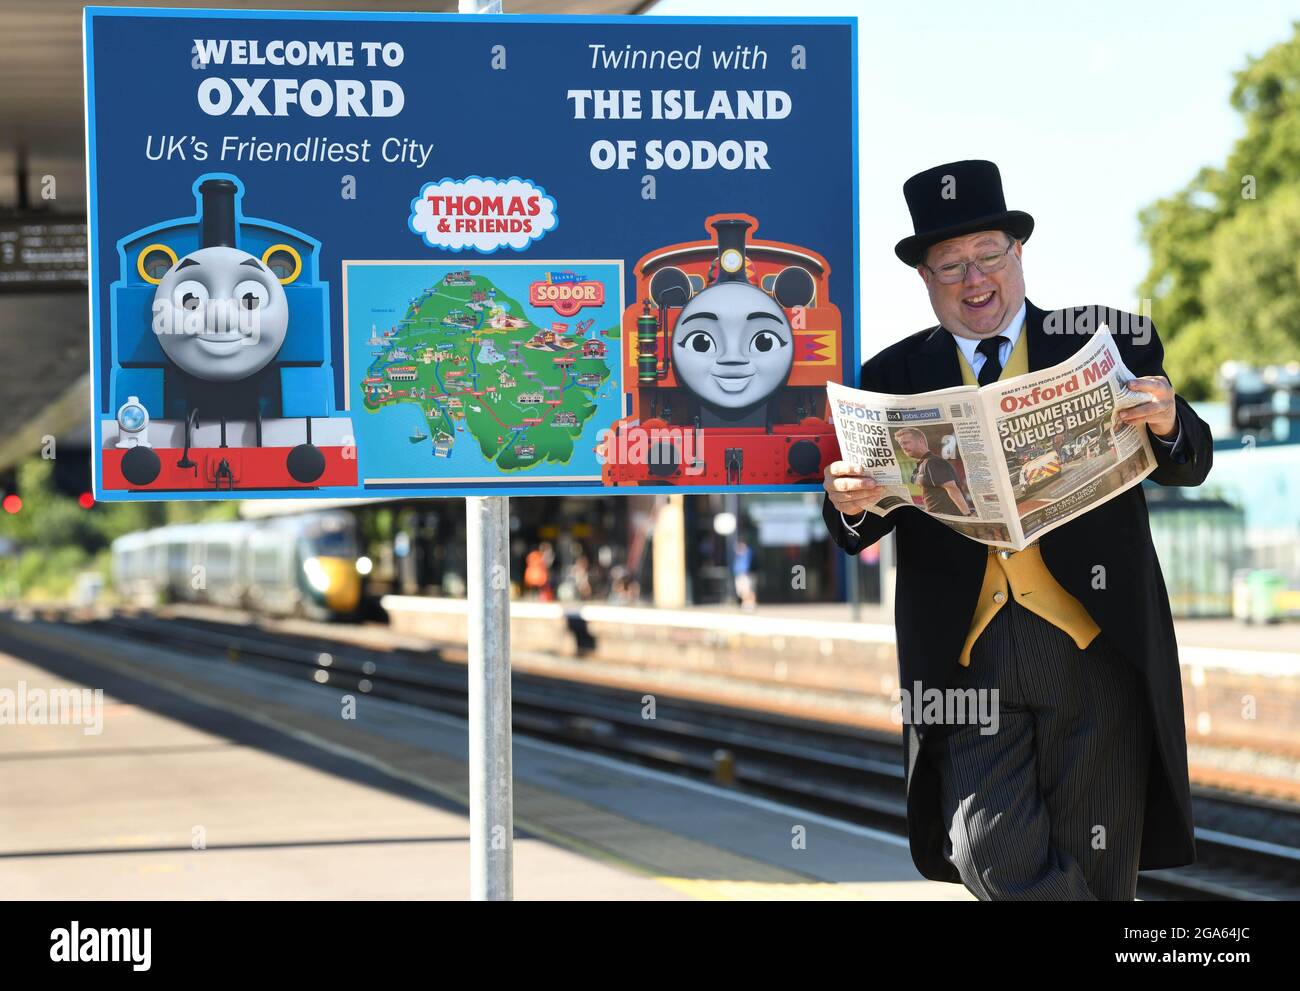 EDITORIAL USE ONLY Sir Topham Hatt, Thomas & Friends live action character  unveils a twinning sign as Oxford is twinned with the Island of Sodor, home  of Thomas the Tank Engine to